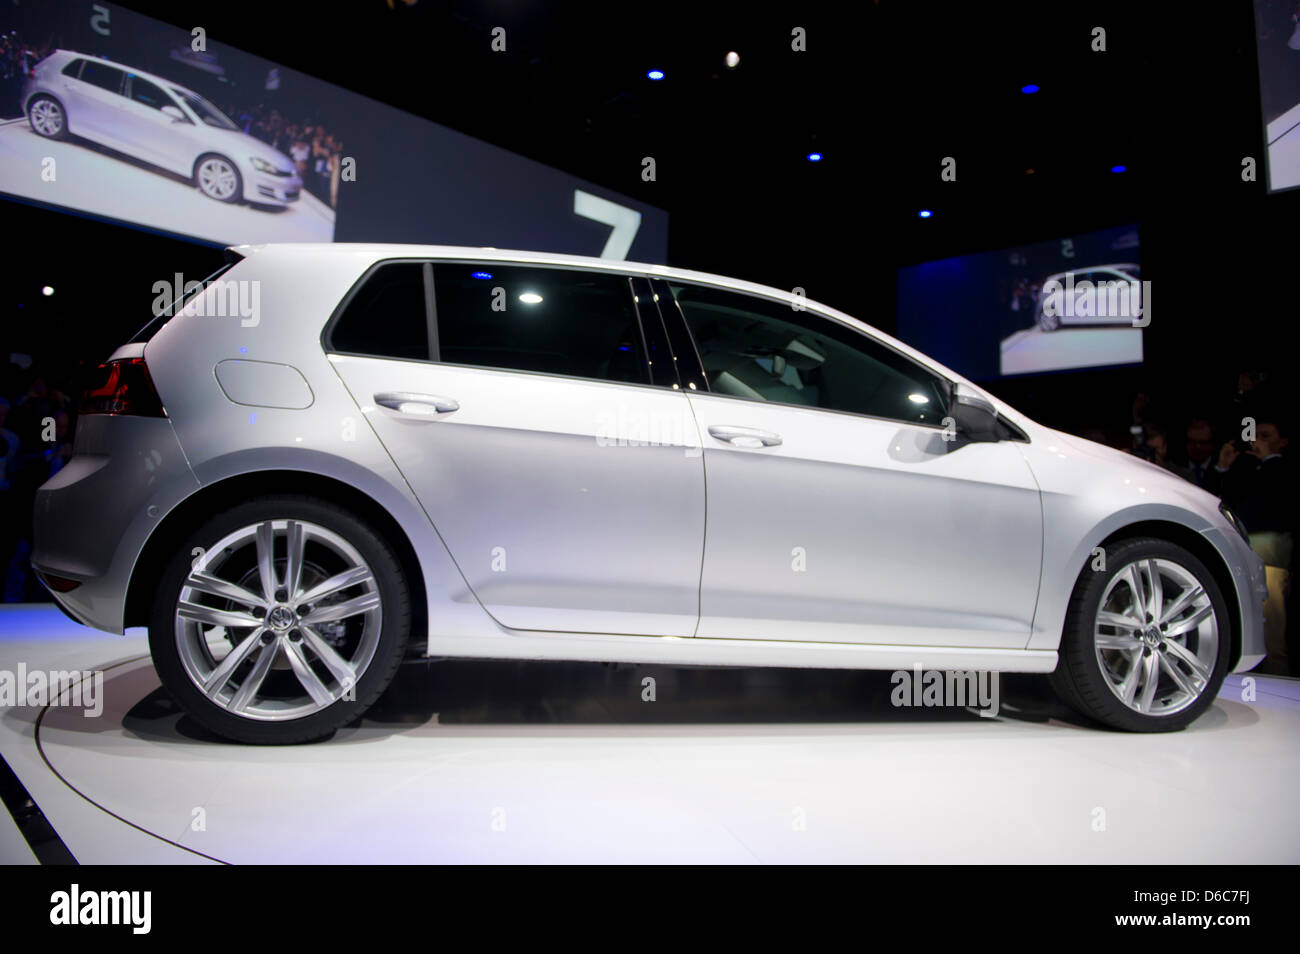 Vw Golf 7 High Resolution Stock Photography and Images - Alamy